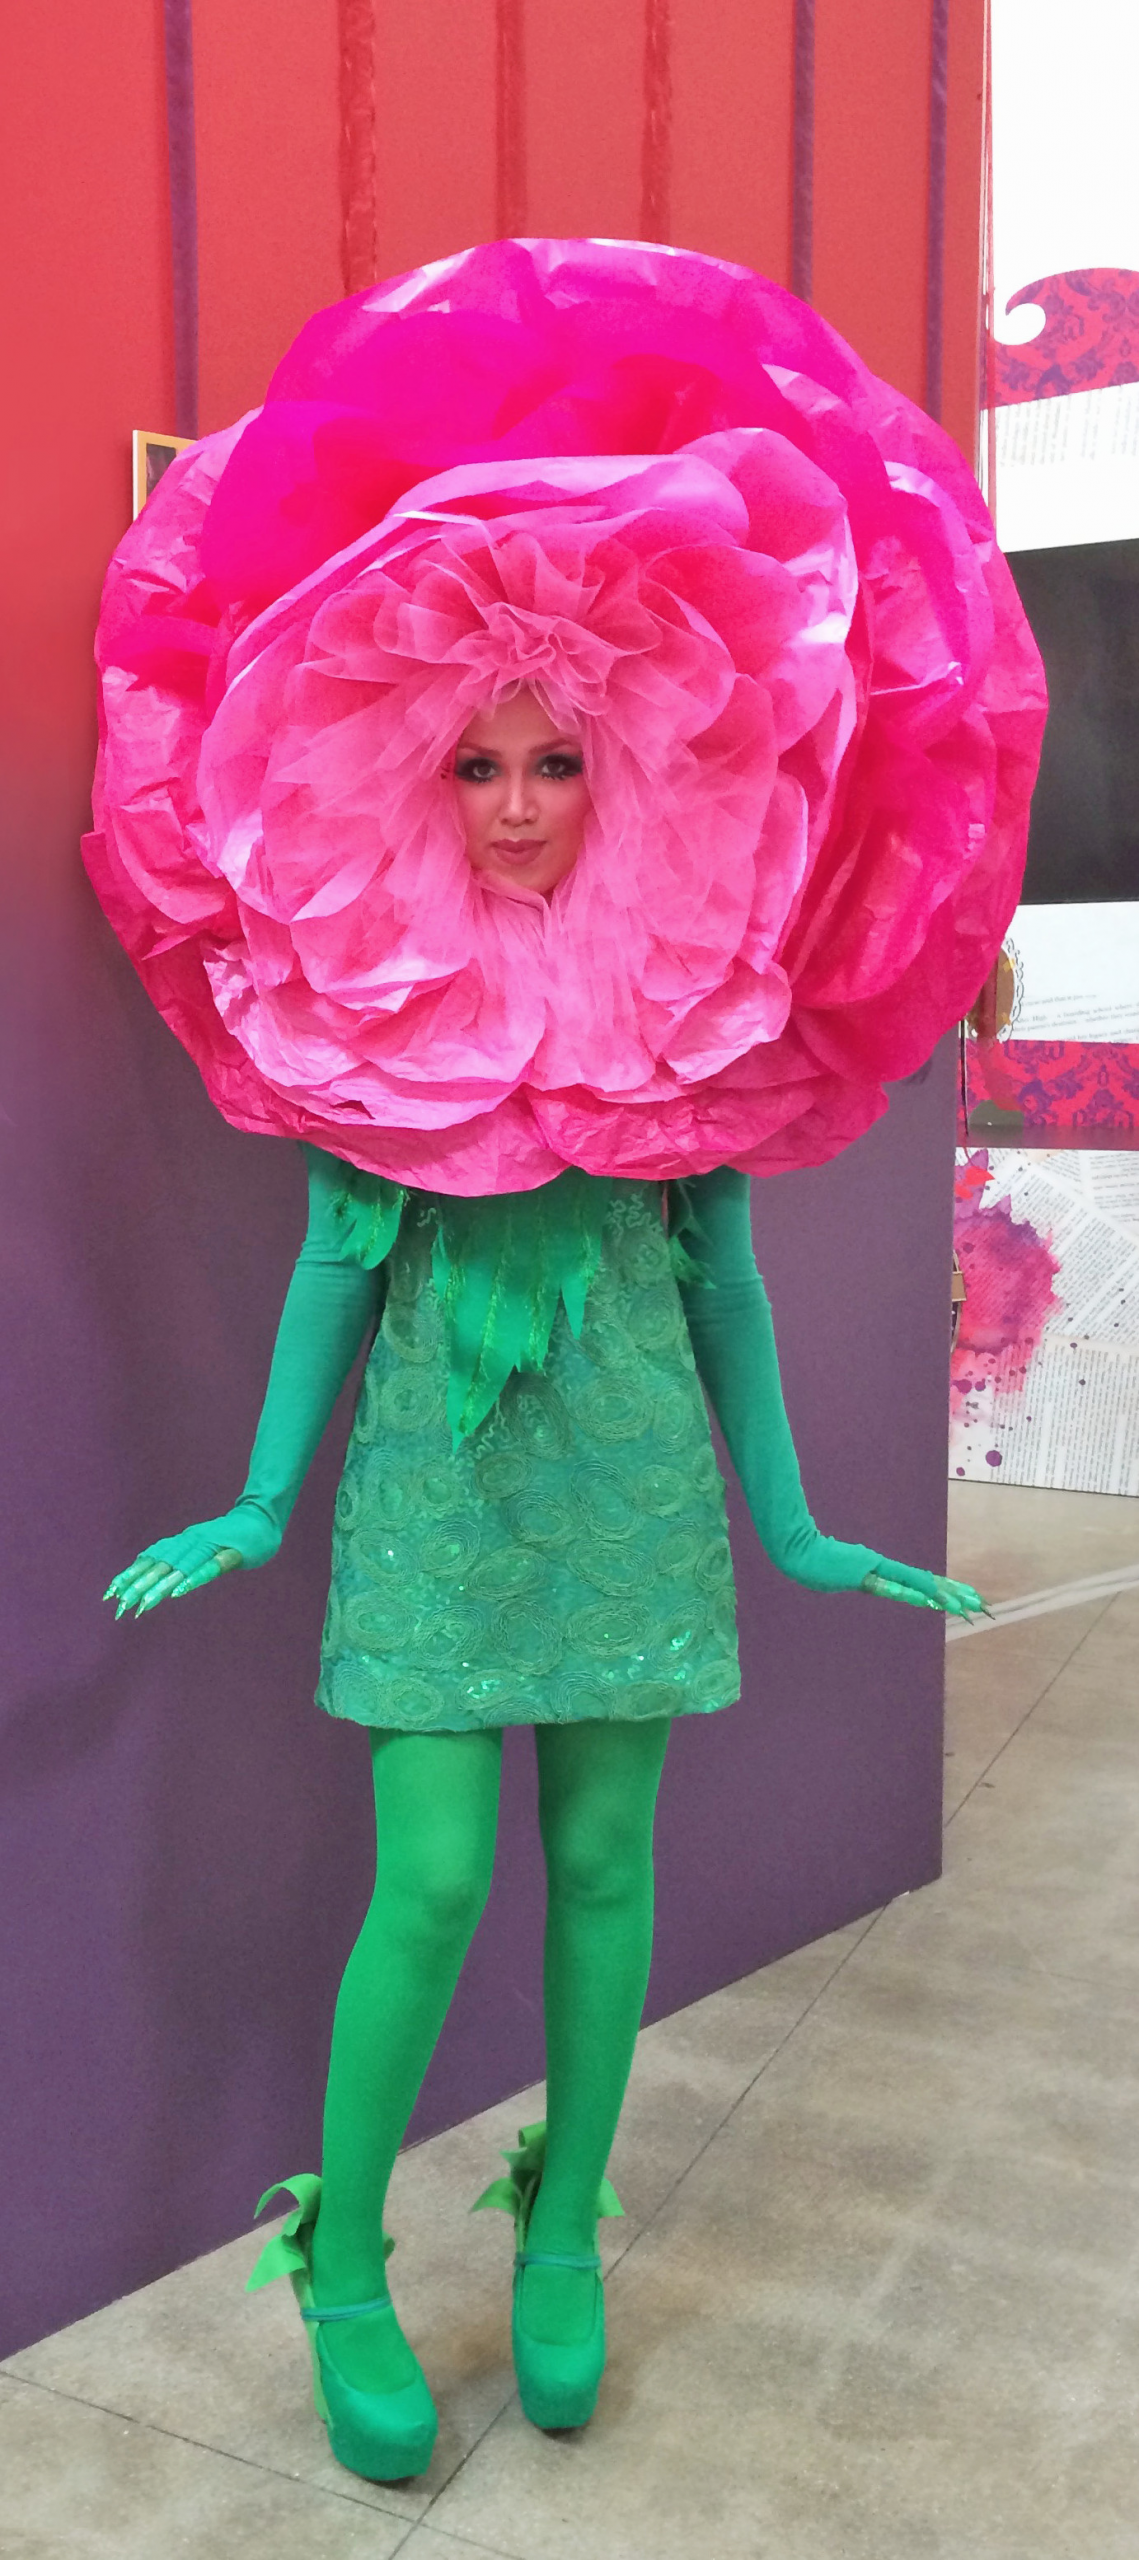 Flower Halloween Costume For Adults
 Flower pose …